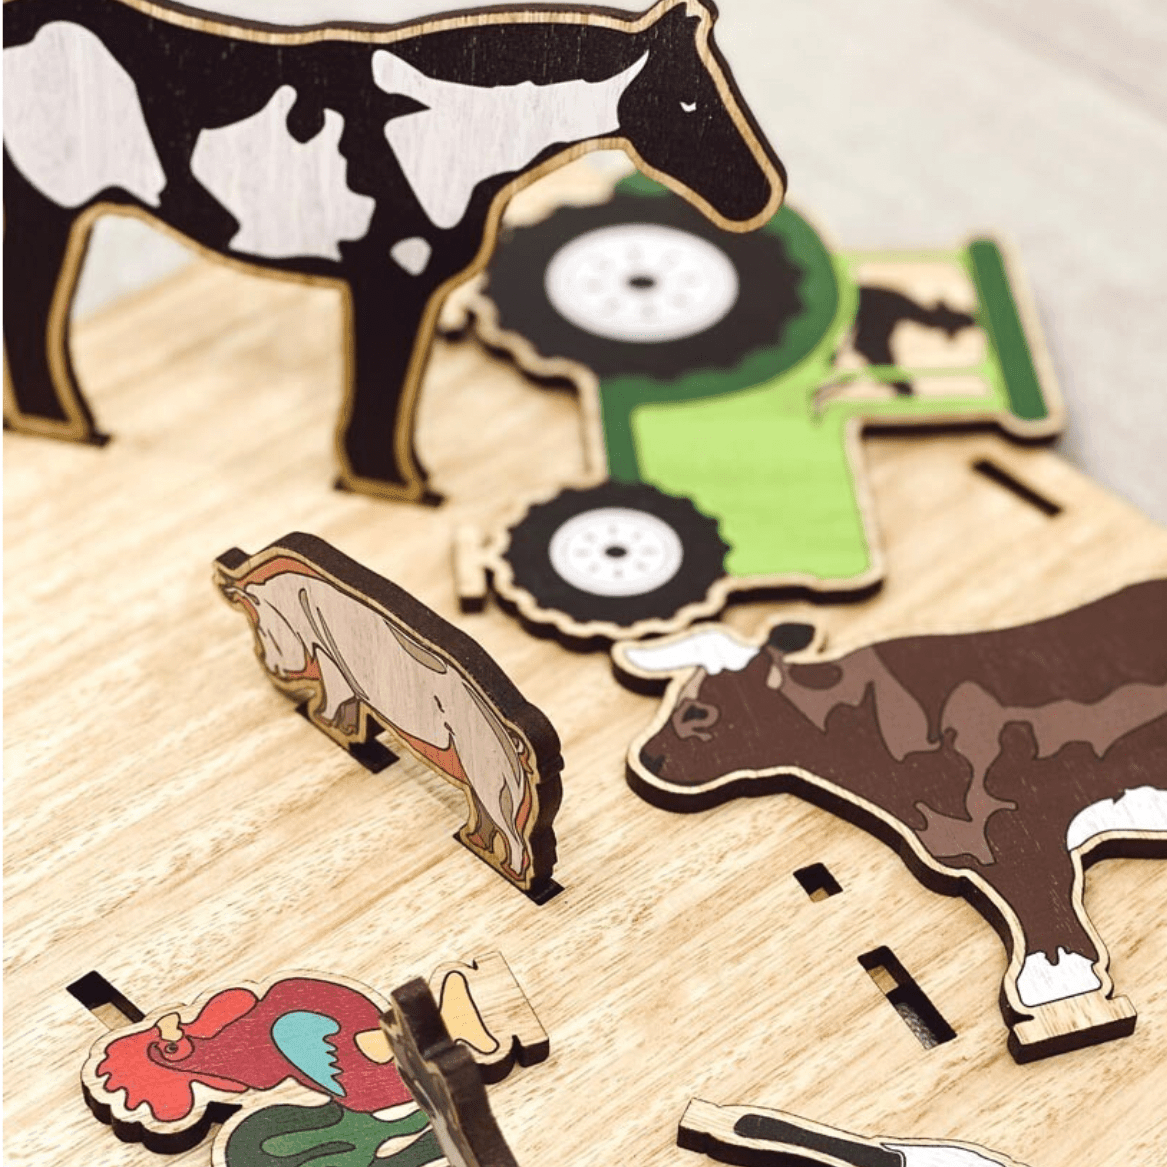 The Curated Parcel - Pop Up Farm Animals Puzzle 